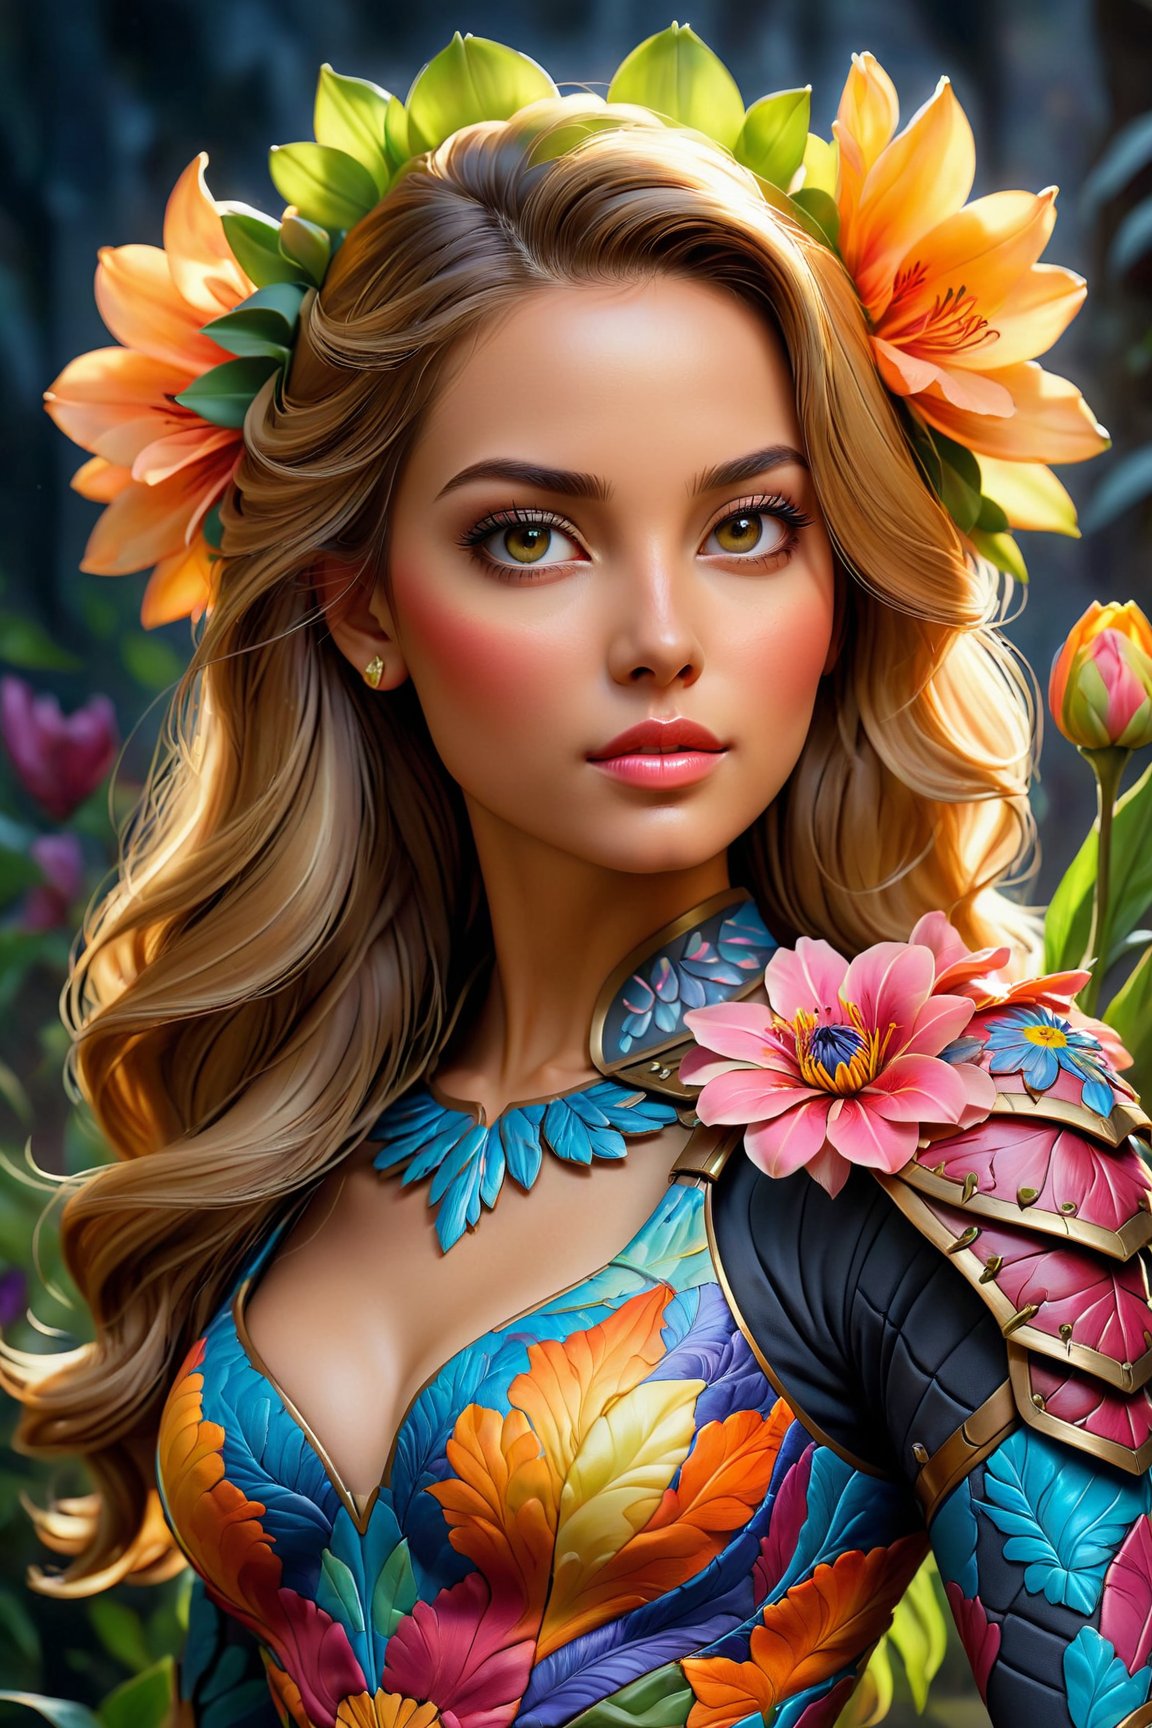 (best quality, realistic, high-resolution), colorful portrait of a woman with flawless anatomy. She is wearing a stunning flower dress that compliments her vibrant personality. Her skin is extremely detailed and realistic, with a natural and lifelike texture. The background is dark, which creates a striking contrast to the colorful flowers adorning her armor. The flowers on her armor represent her strength and beauty. The lighting accentuates the contours of her face, adding depth and dimension to the portrait. The overall composition is masterfully done, showcasing the intricate details and achieving a high level of realism, Realistic